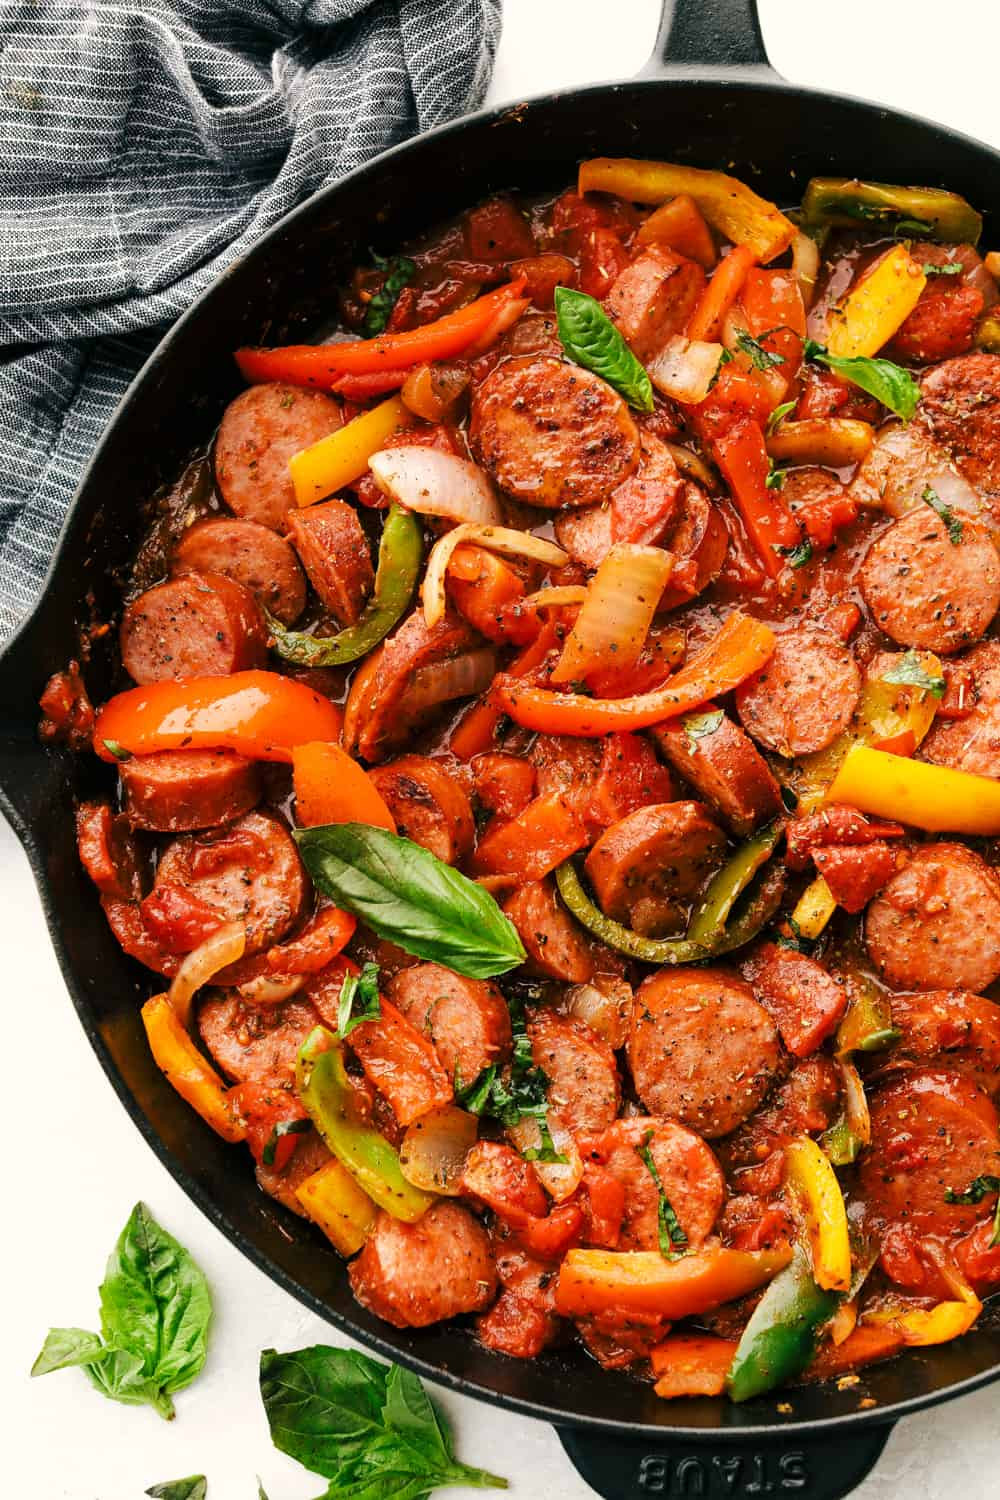 Italian Sausage Recipes for Dinner Elegant Skillet Italian Sausage and Peppers – Healthy Chicken Recipes